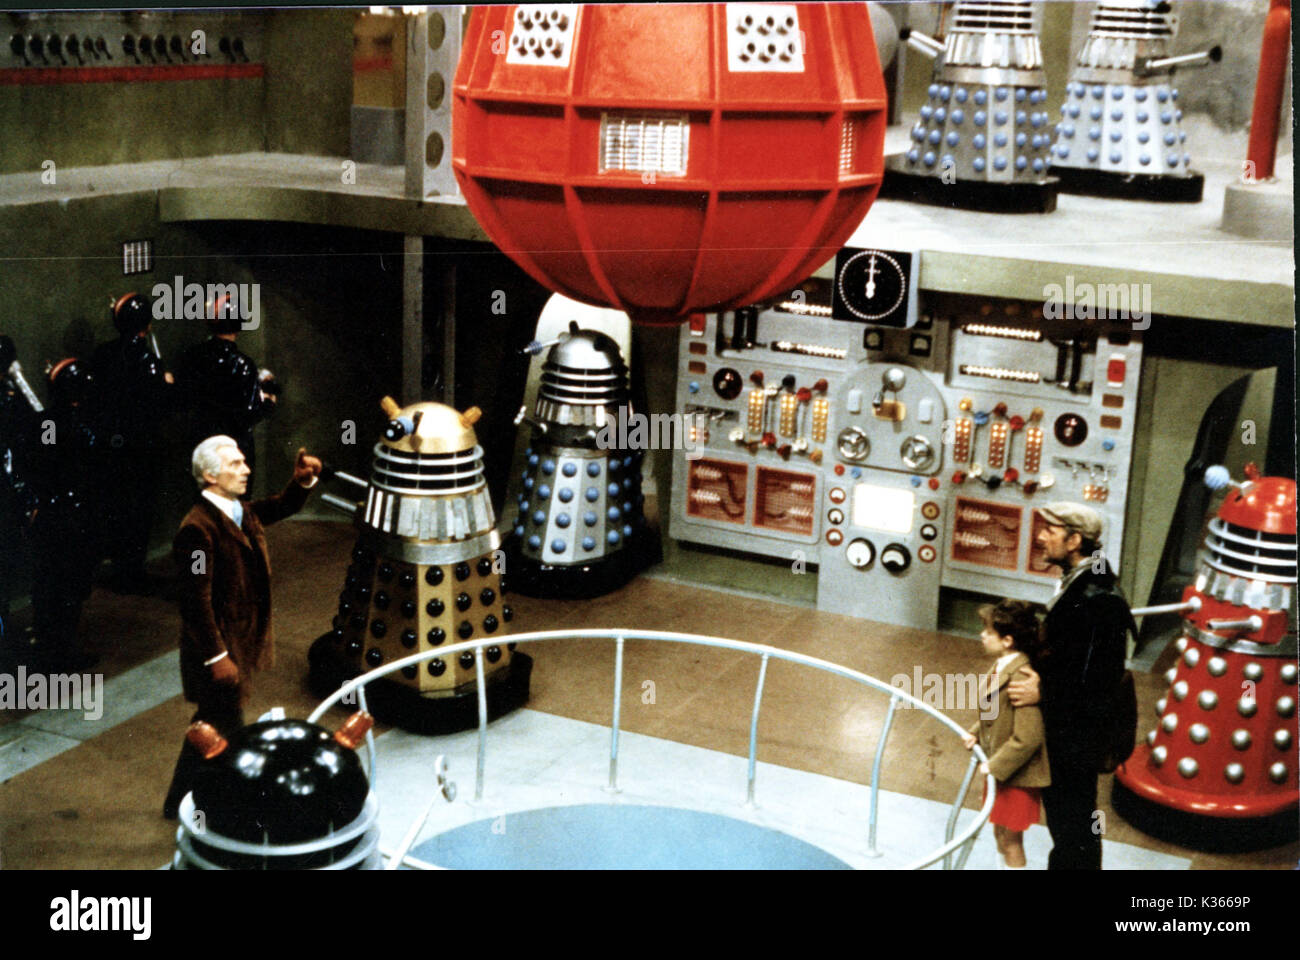 DALEKS INVASION EARTH 2150 A.D. PETER CUSHING, ROBERTA TOVEY AND ANDREW KEIR     Date: 1966 Stock Photo